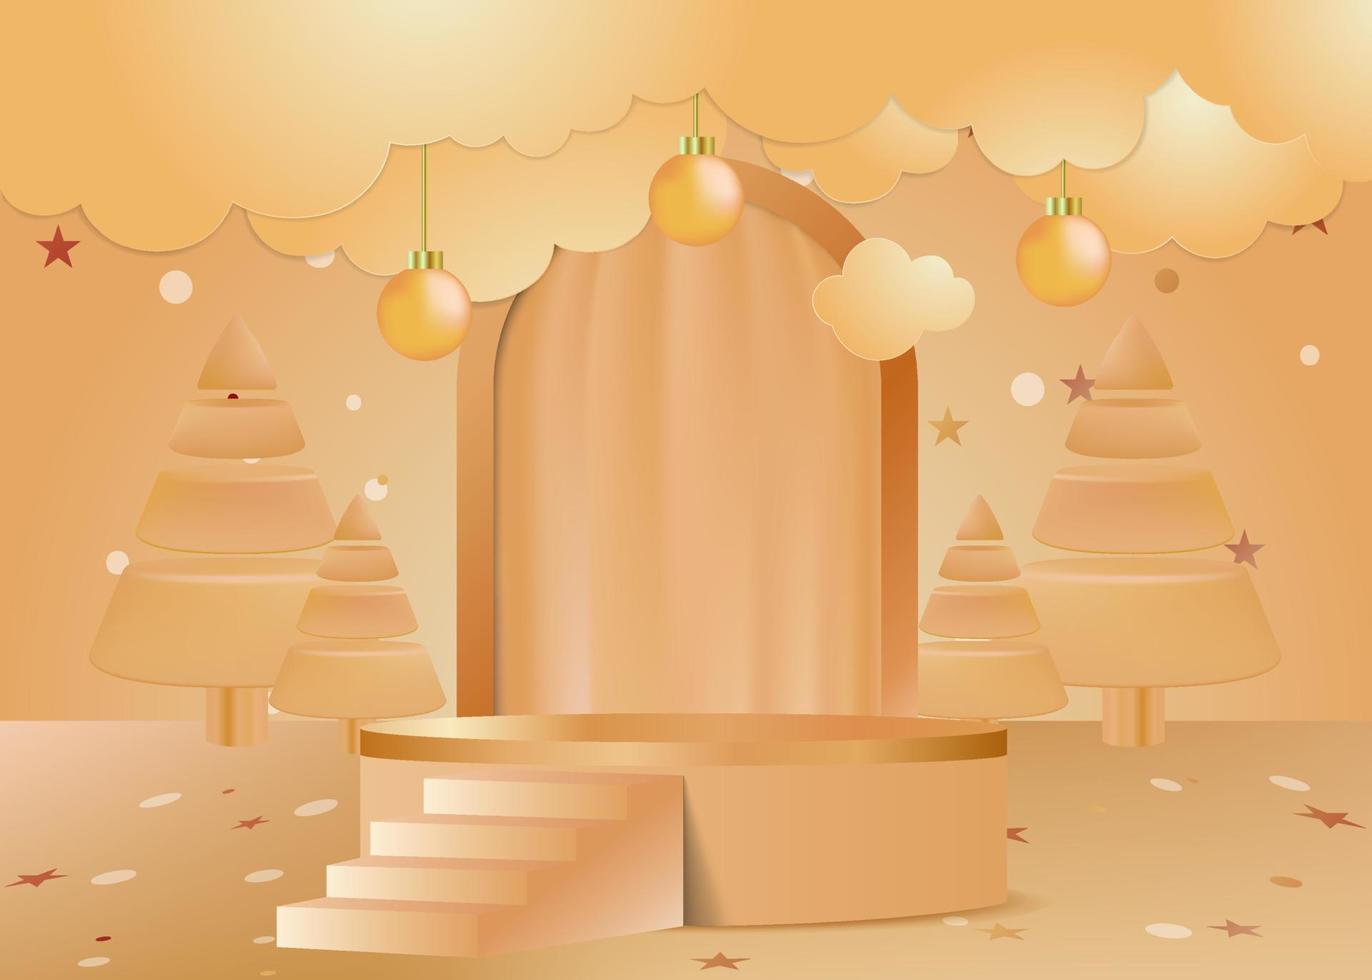 Merry Christmas post with golden background stage light effect vector